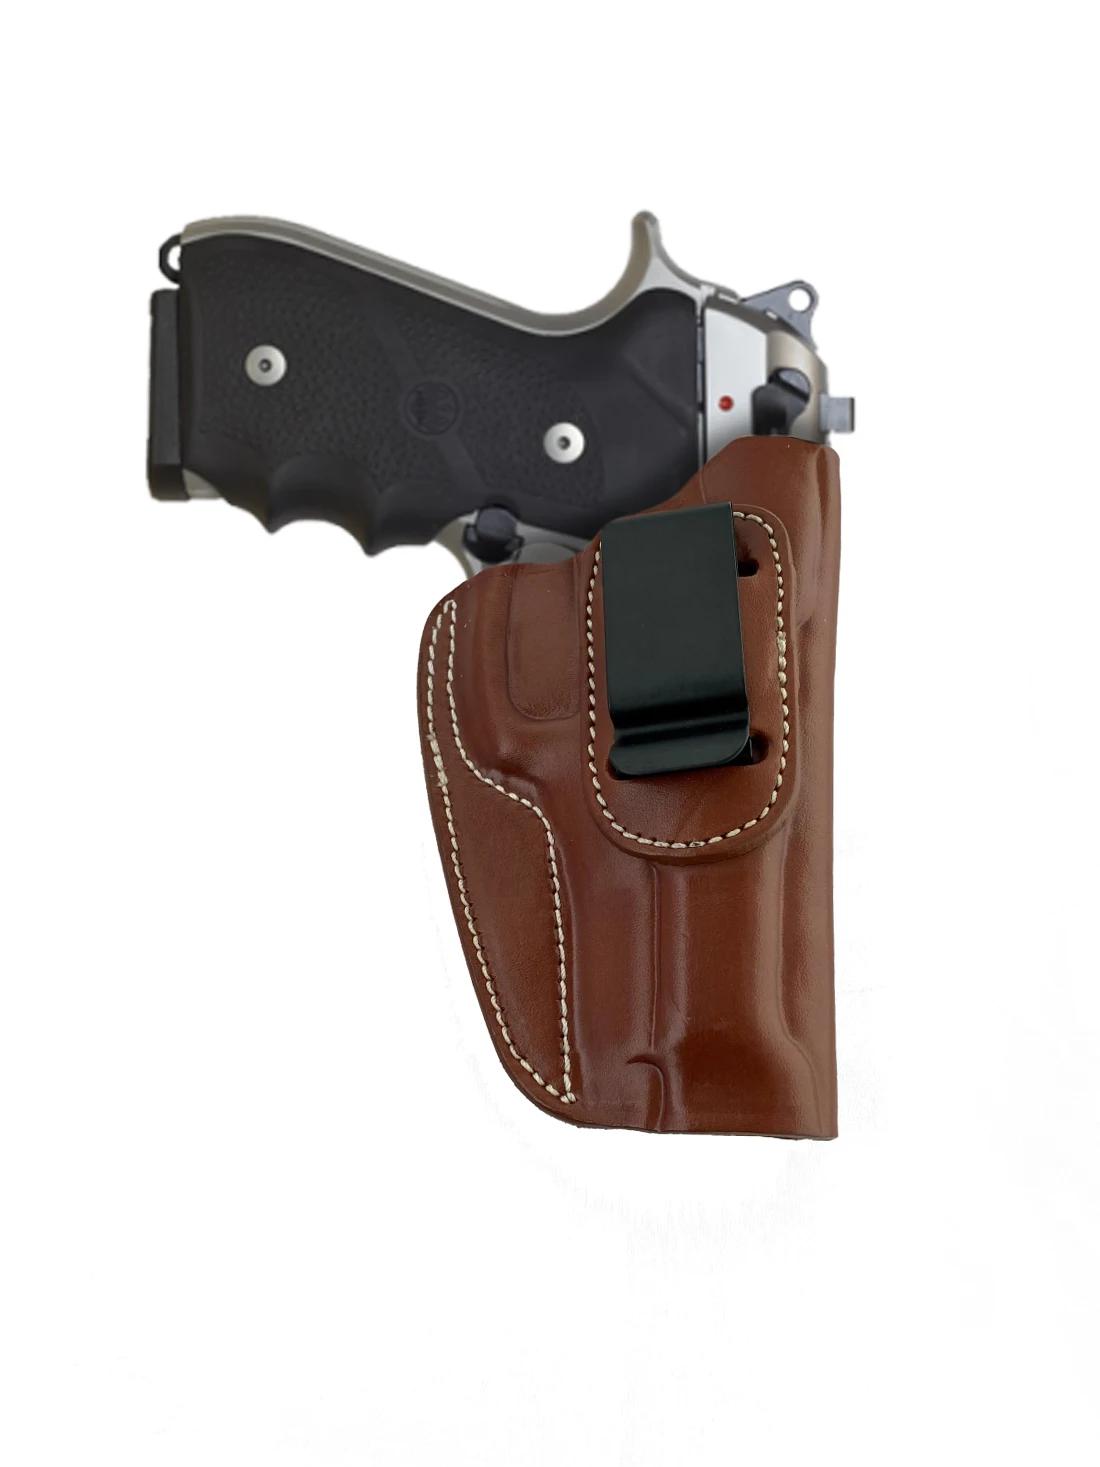 

Leather Gun Holster For Walther P99 Iwb Metal Clip Inside The Waist Band Carry Handmade Pistol Pouch Weapon Accessory Cover